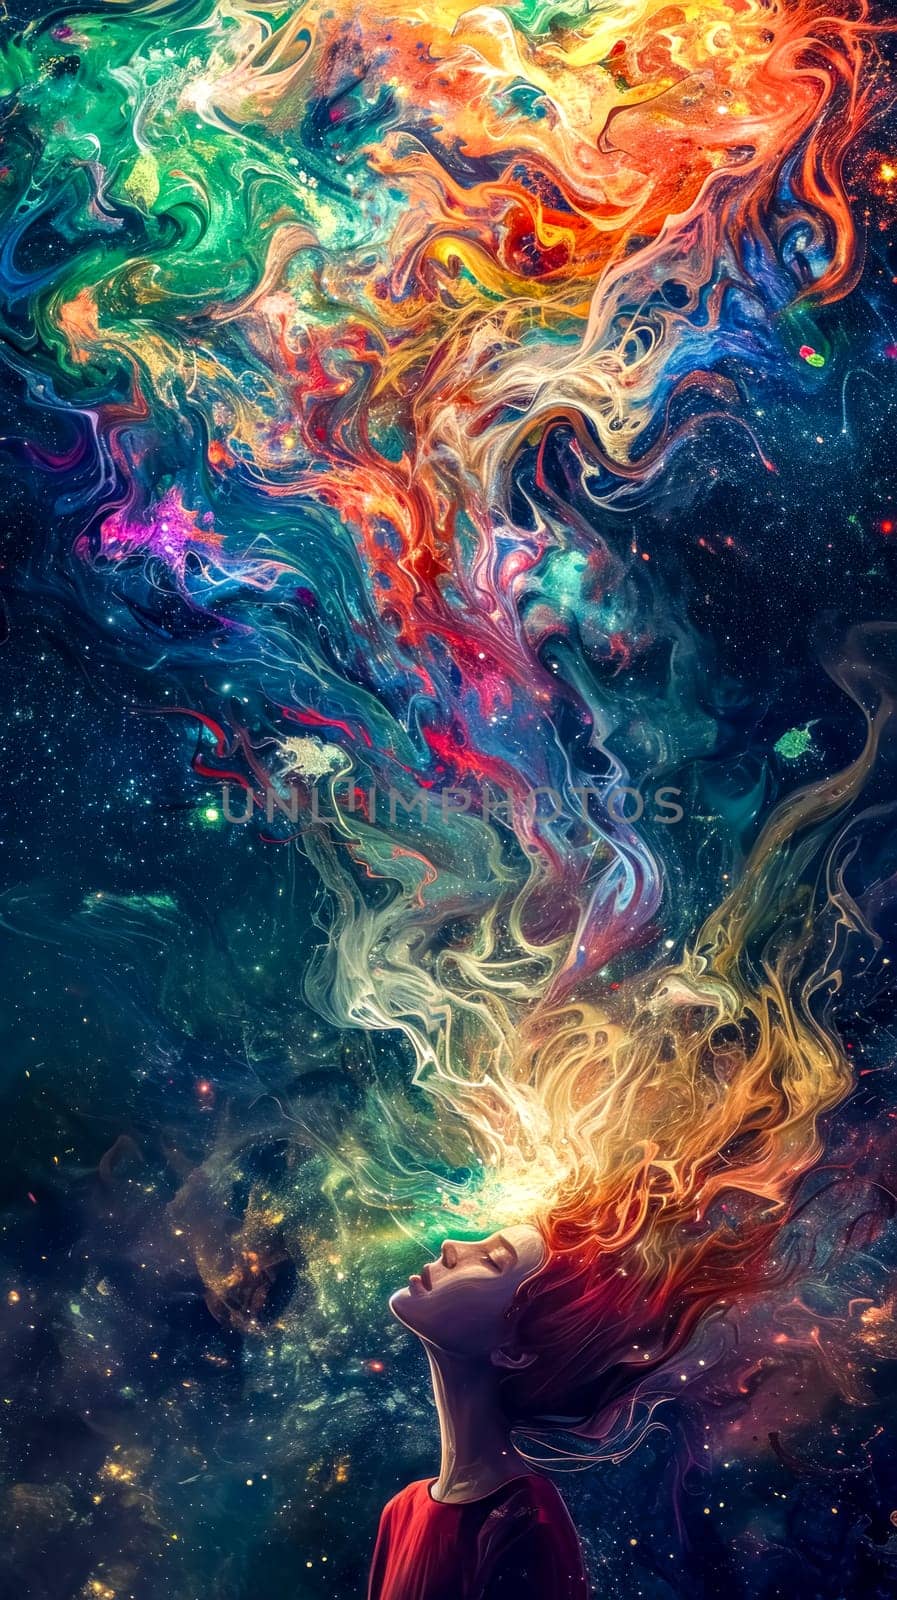 depiction of a person with their head tilted back, hair flowing upwards and transforming into a mesmerizing swirl of cosmic colors, blending with the starry expanse of space by Edophoto